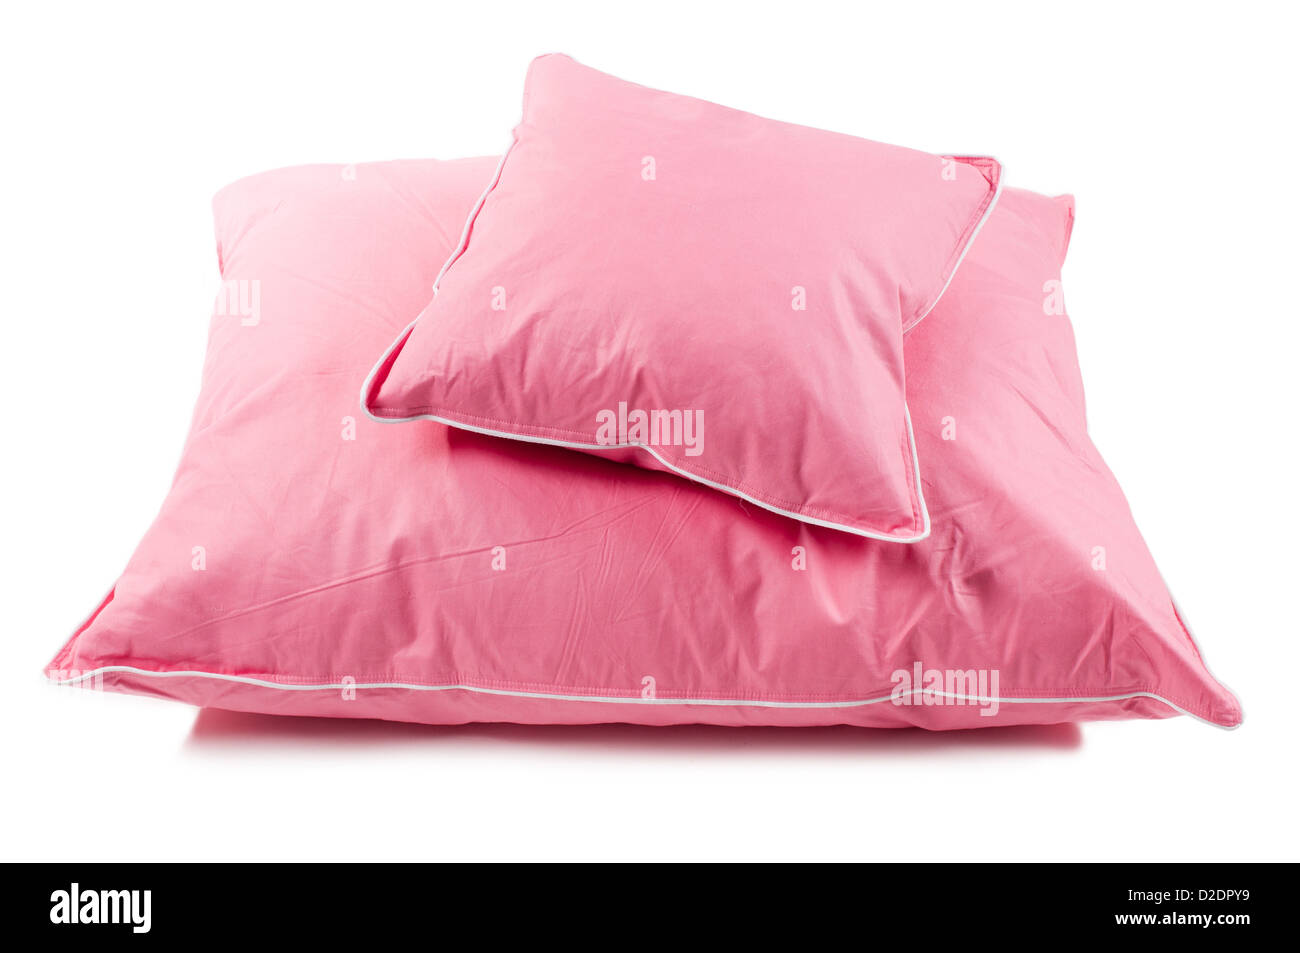 cotton fluffy two pillows without cover Stock Photo